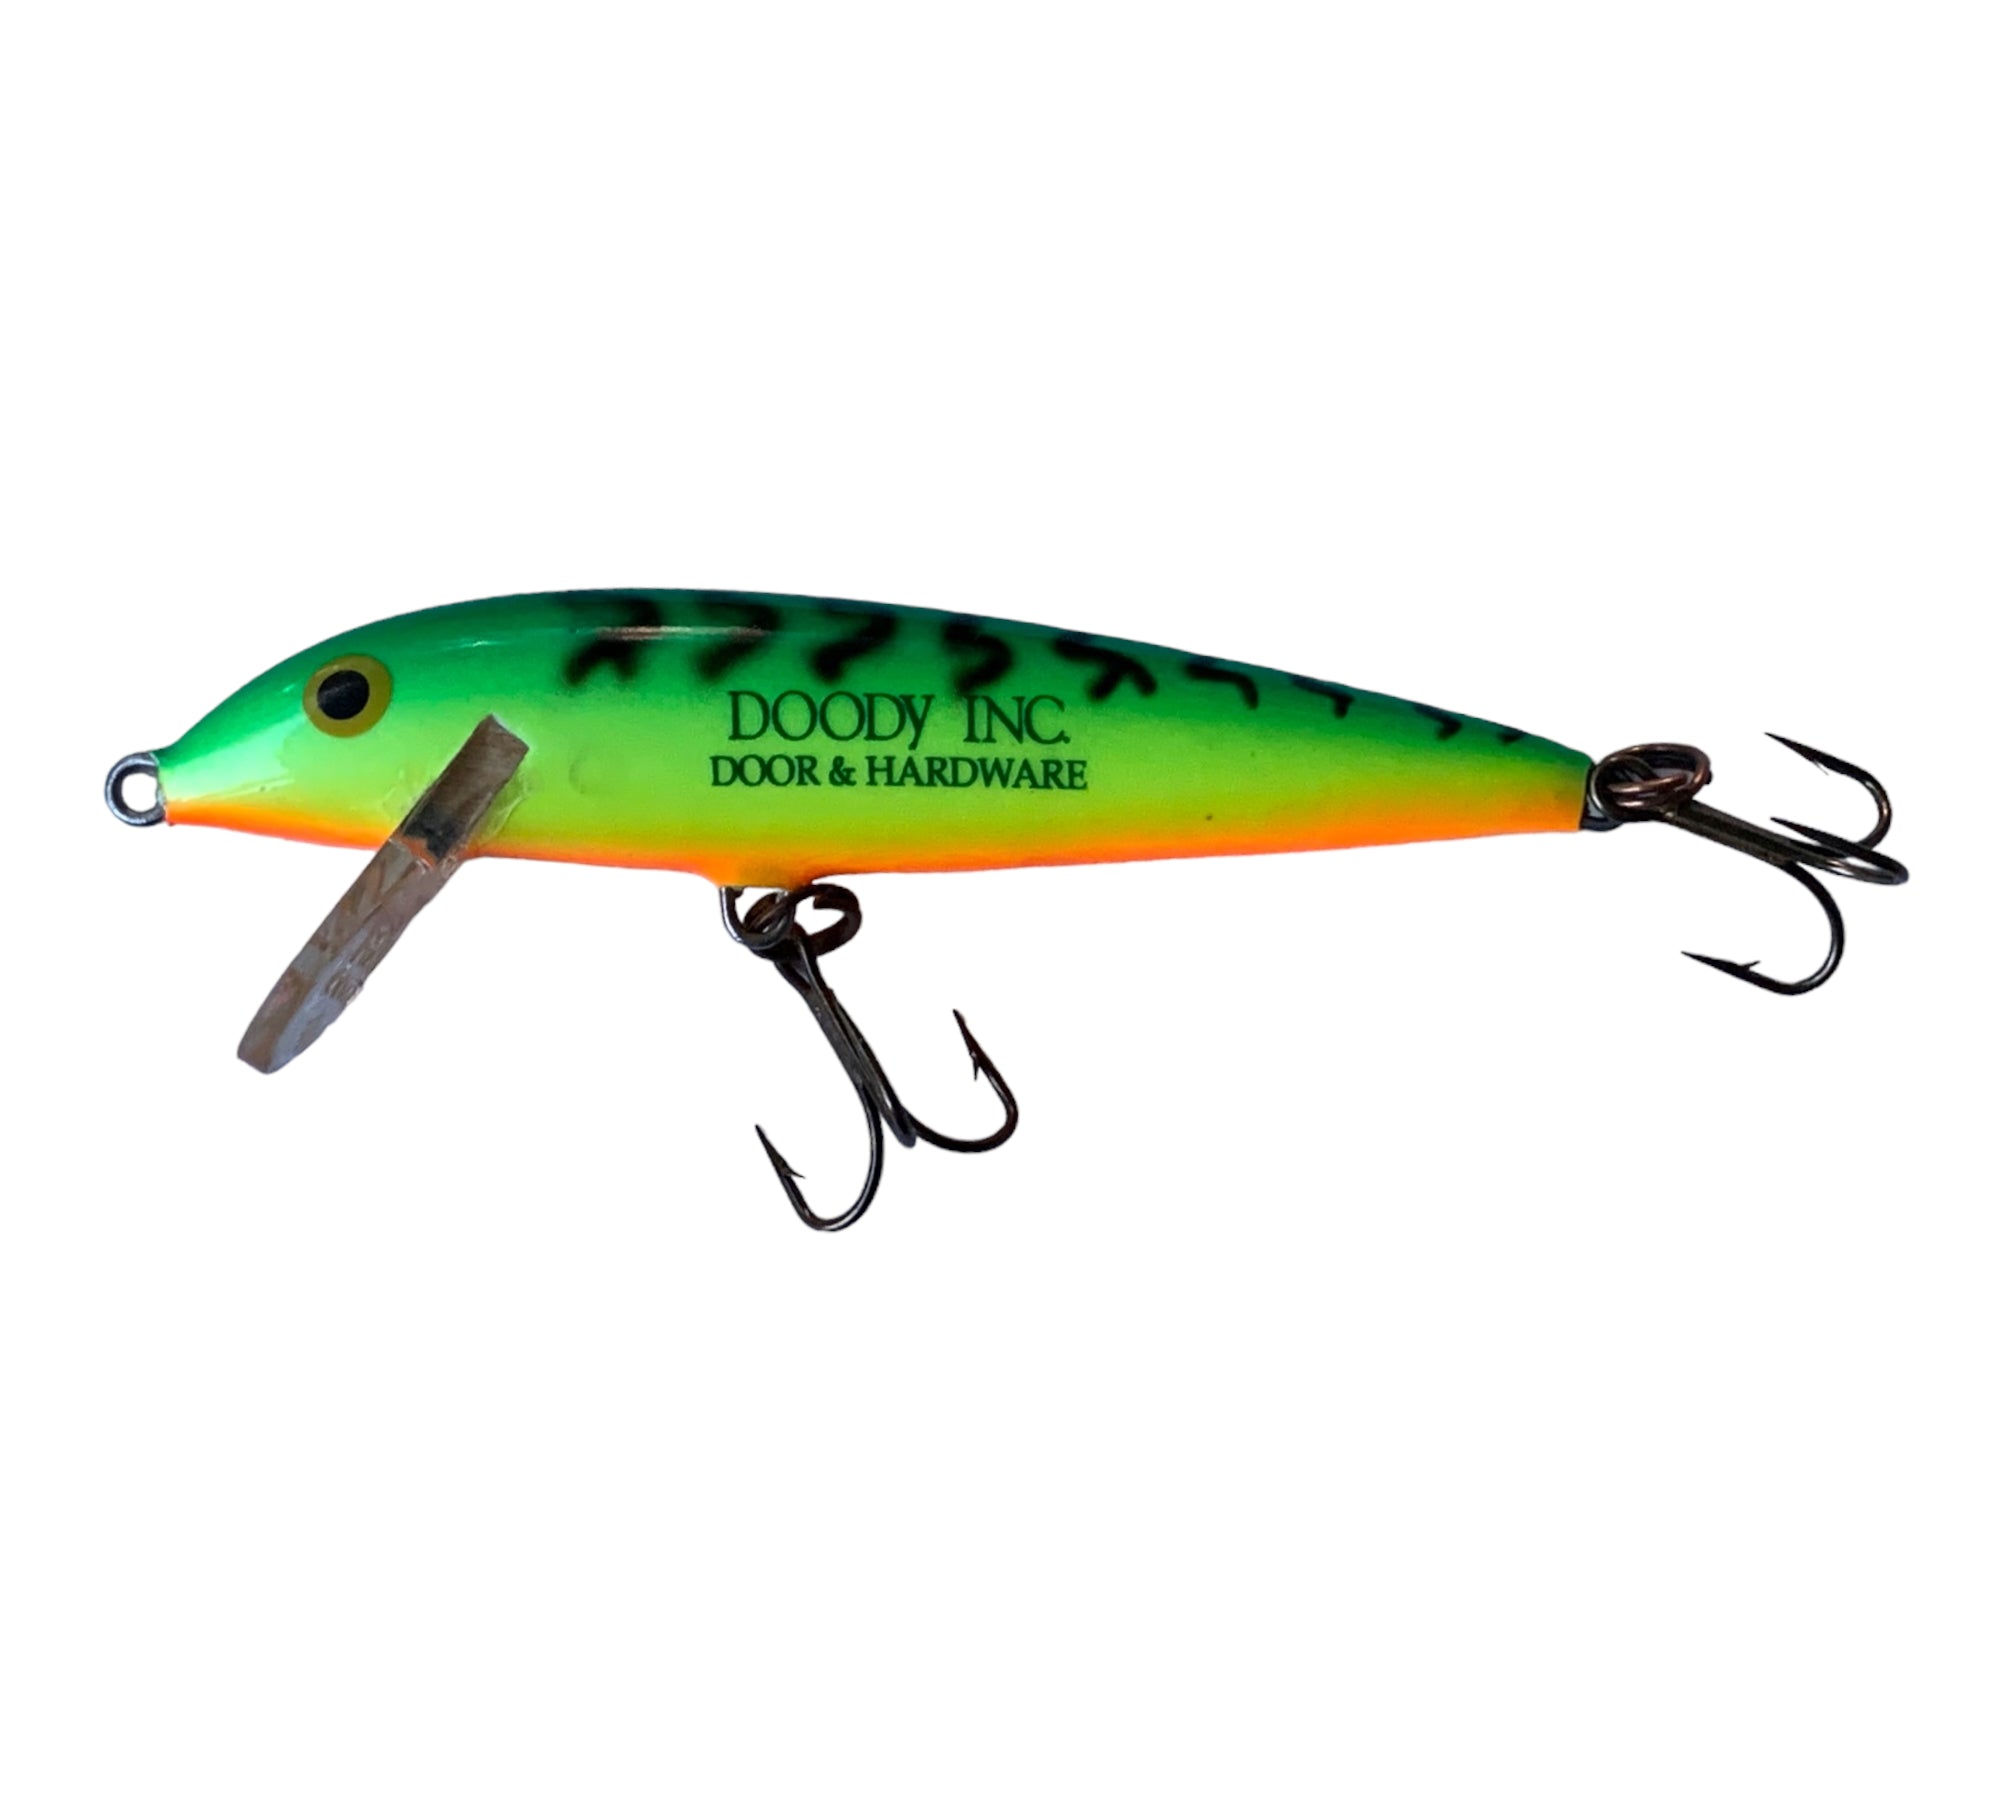 RAPALA LURES CD-9 Countdown Fishing Lure • FIRE TIGER – Toad Tackle